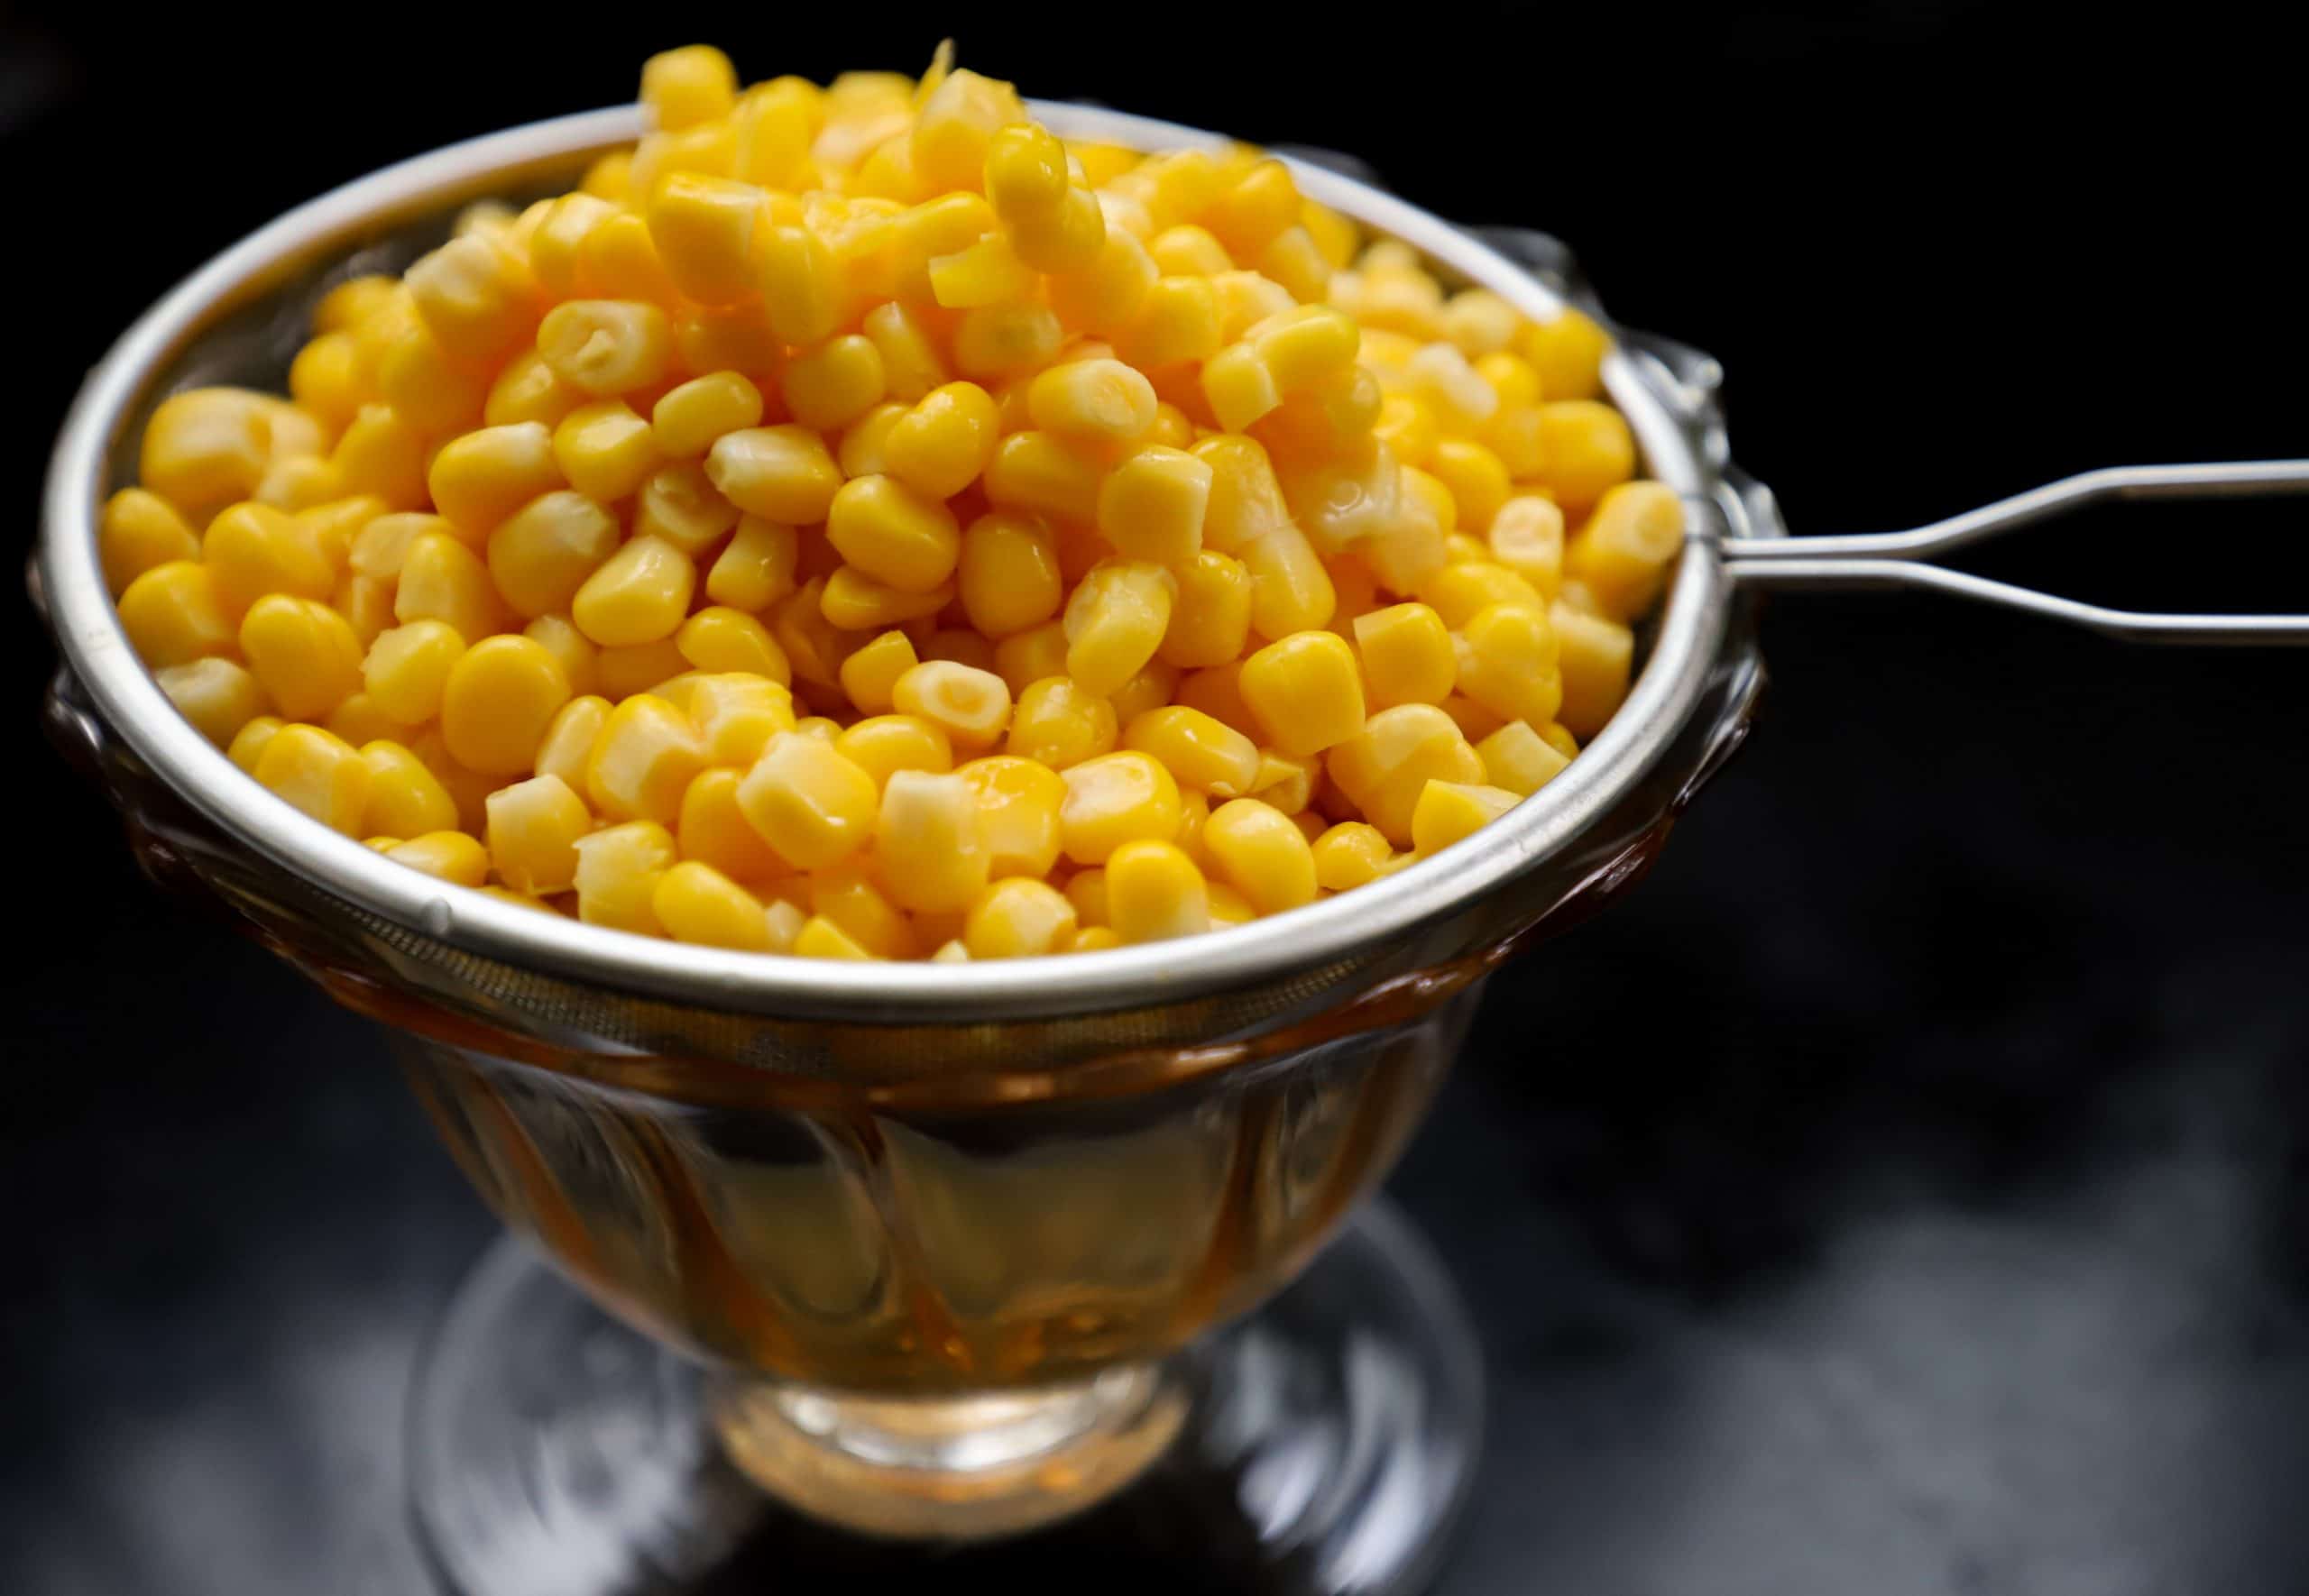 What Do We Know About Corn